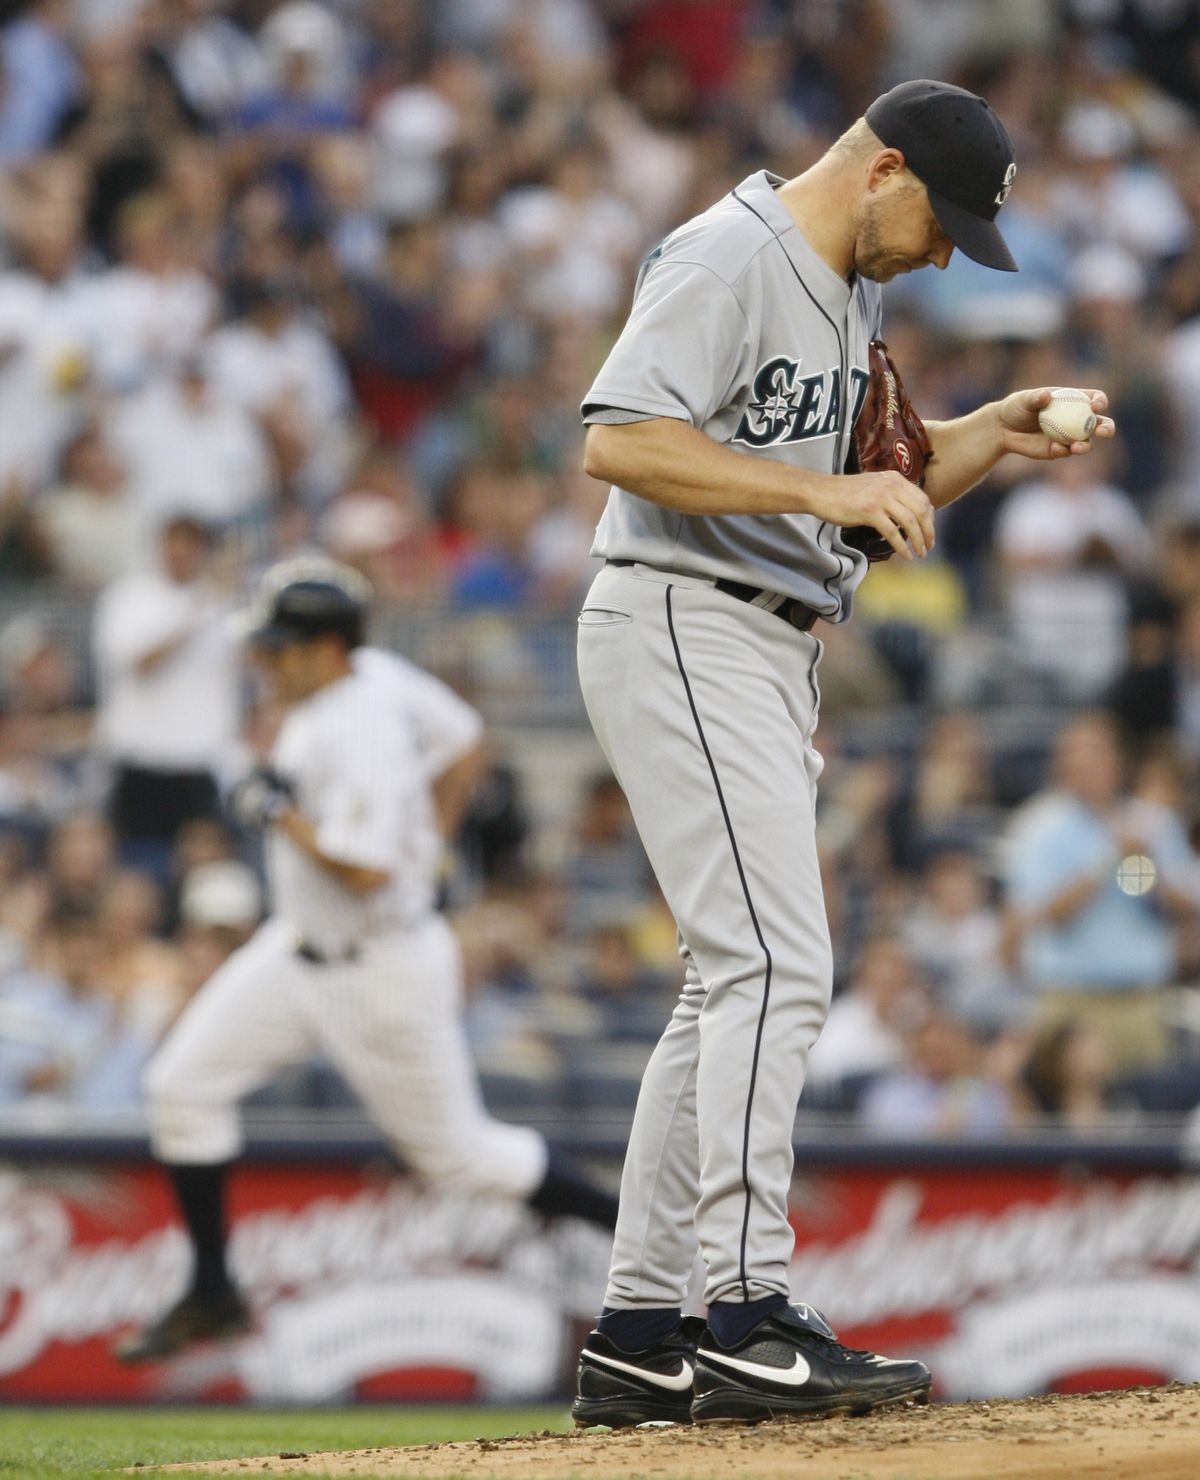 Seattle’s Jarrod Washburn looks at the mound after allowing a home run to the Yankees’ Johnny Damon. (Associated Press / The Spokesman-Review)